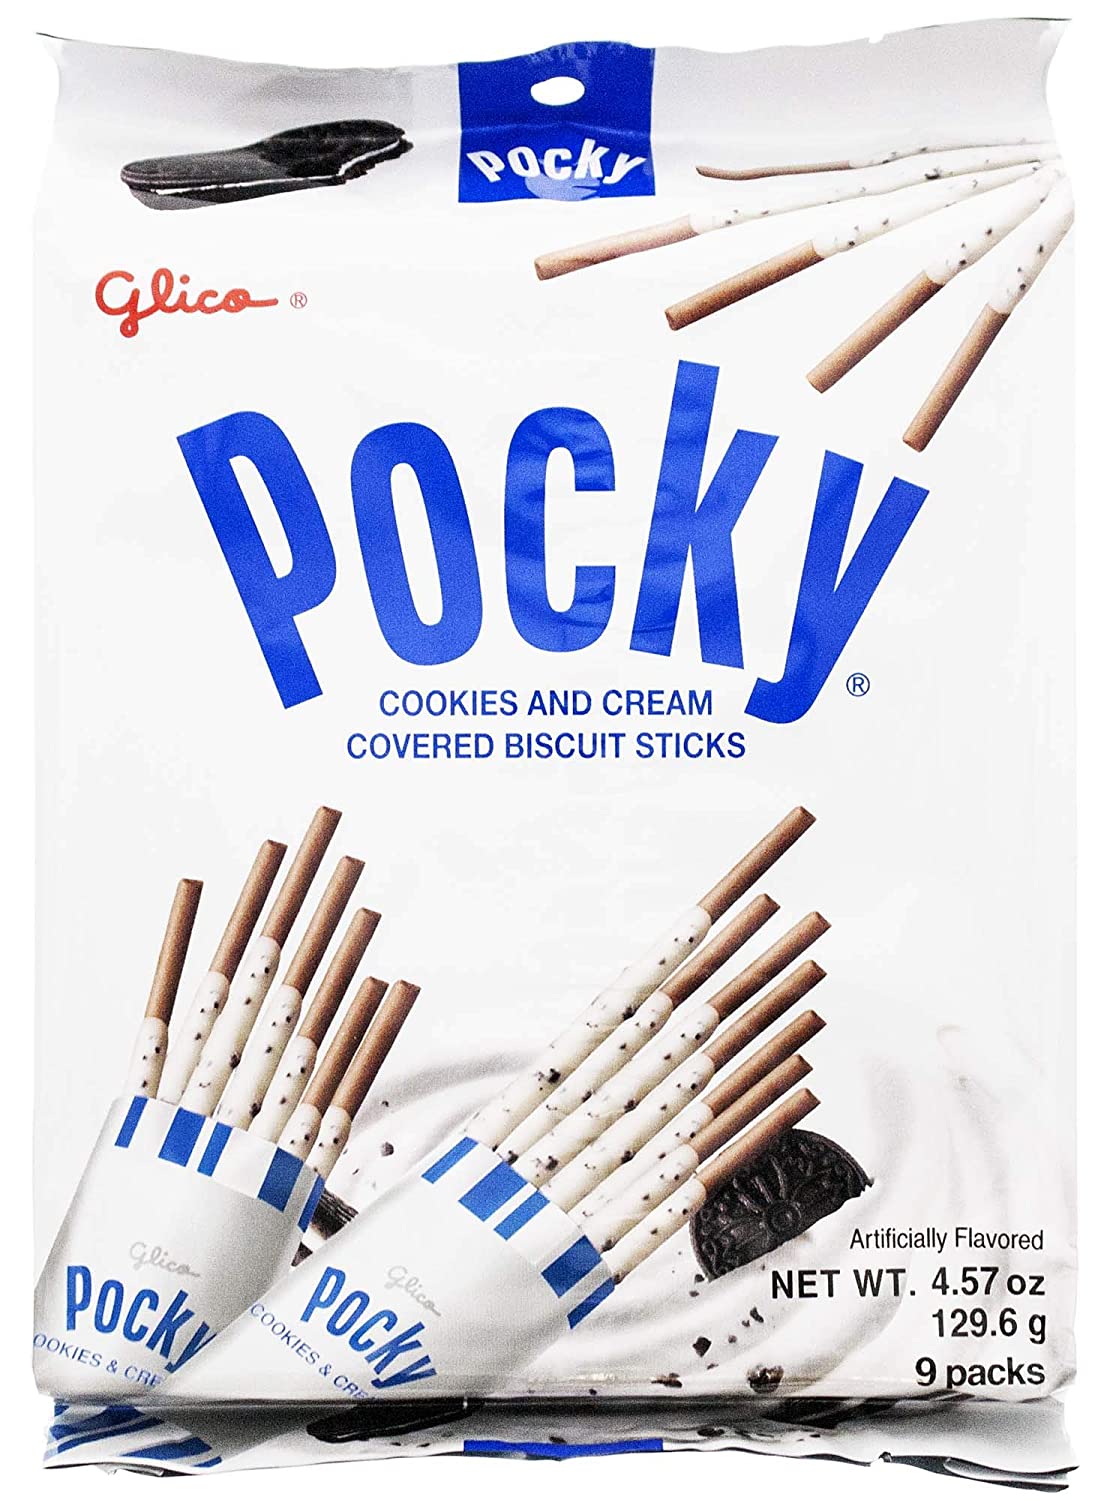 4.57oz. Glico Pocky Cookies & Cream Covered Biscuit Sticks (9 Individual Bags) $3.50 + Free Ship w/Prime